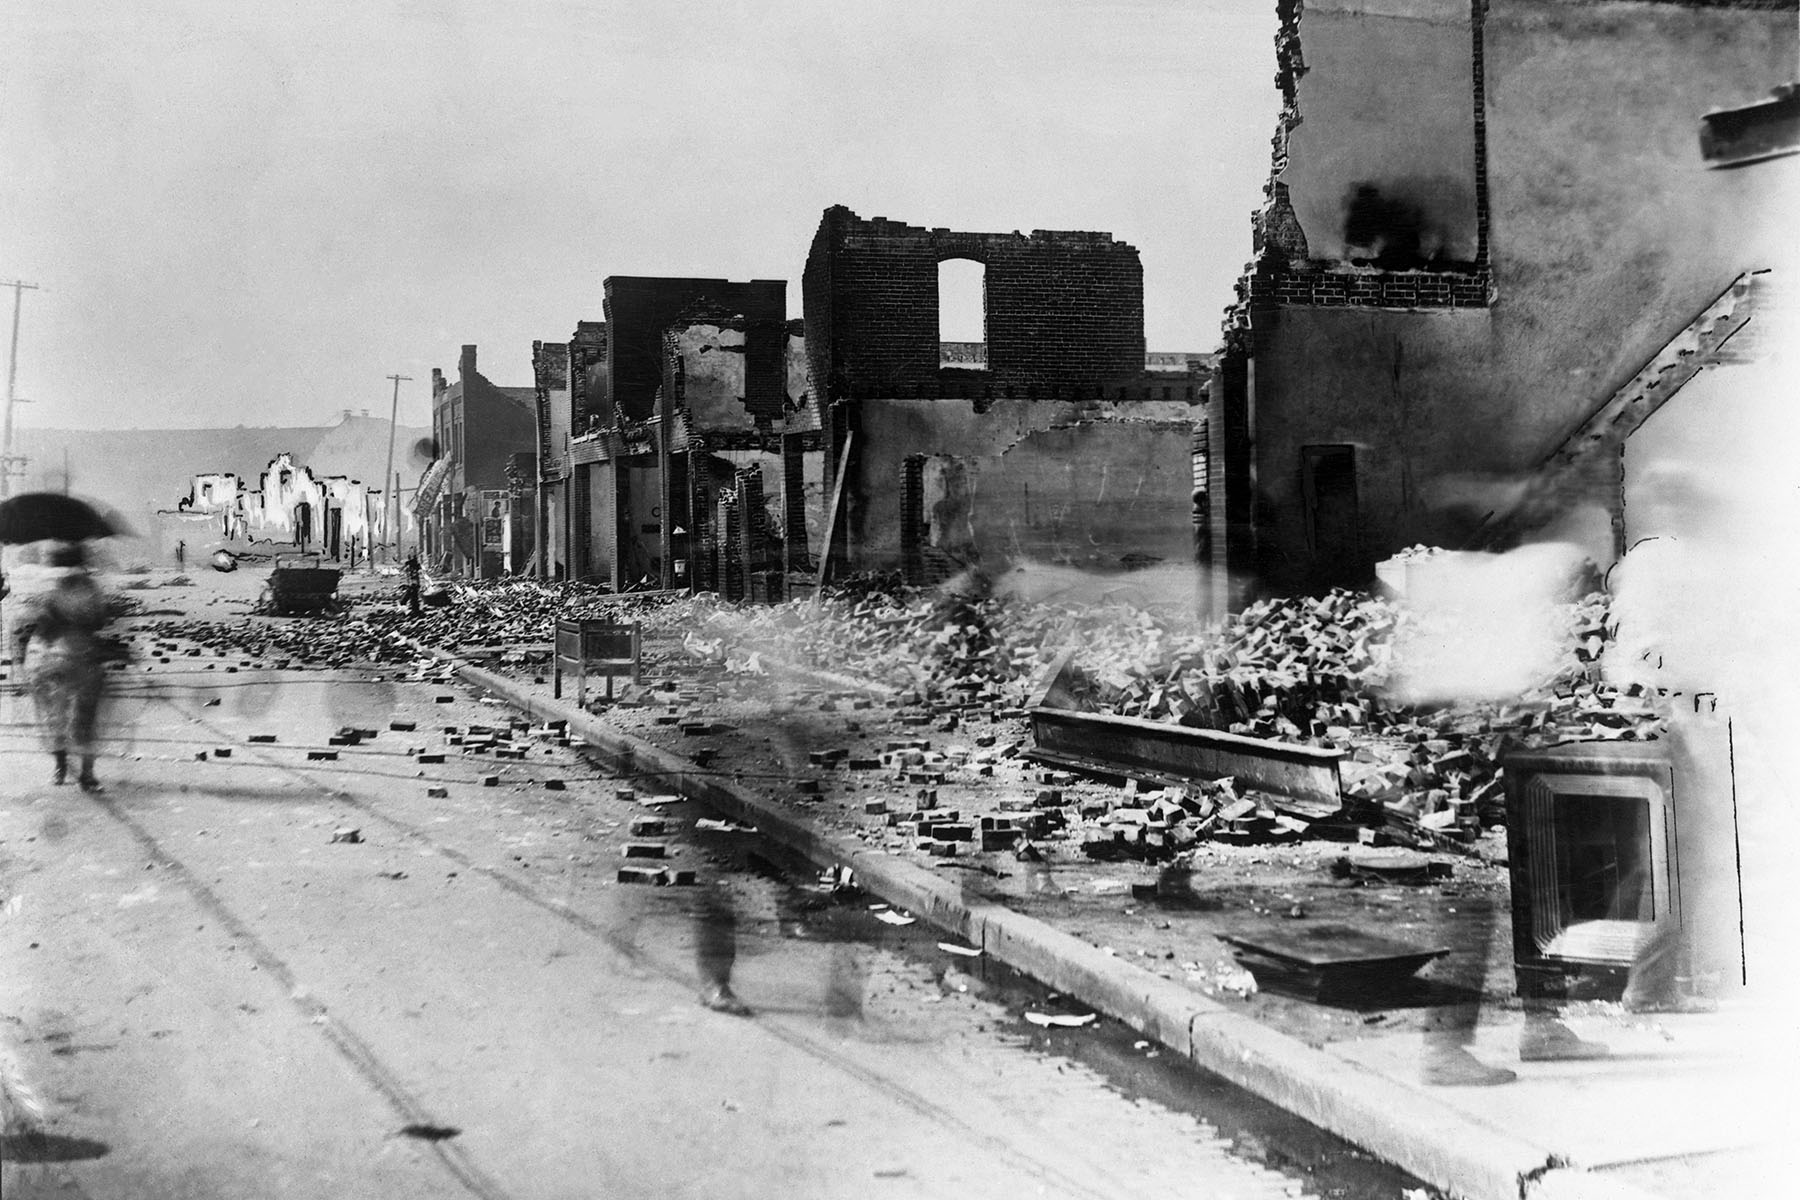 Destroyed homes and businesses are seen in the aftermath of the Tulsa Massacre.